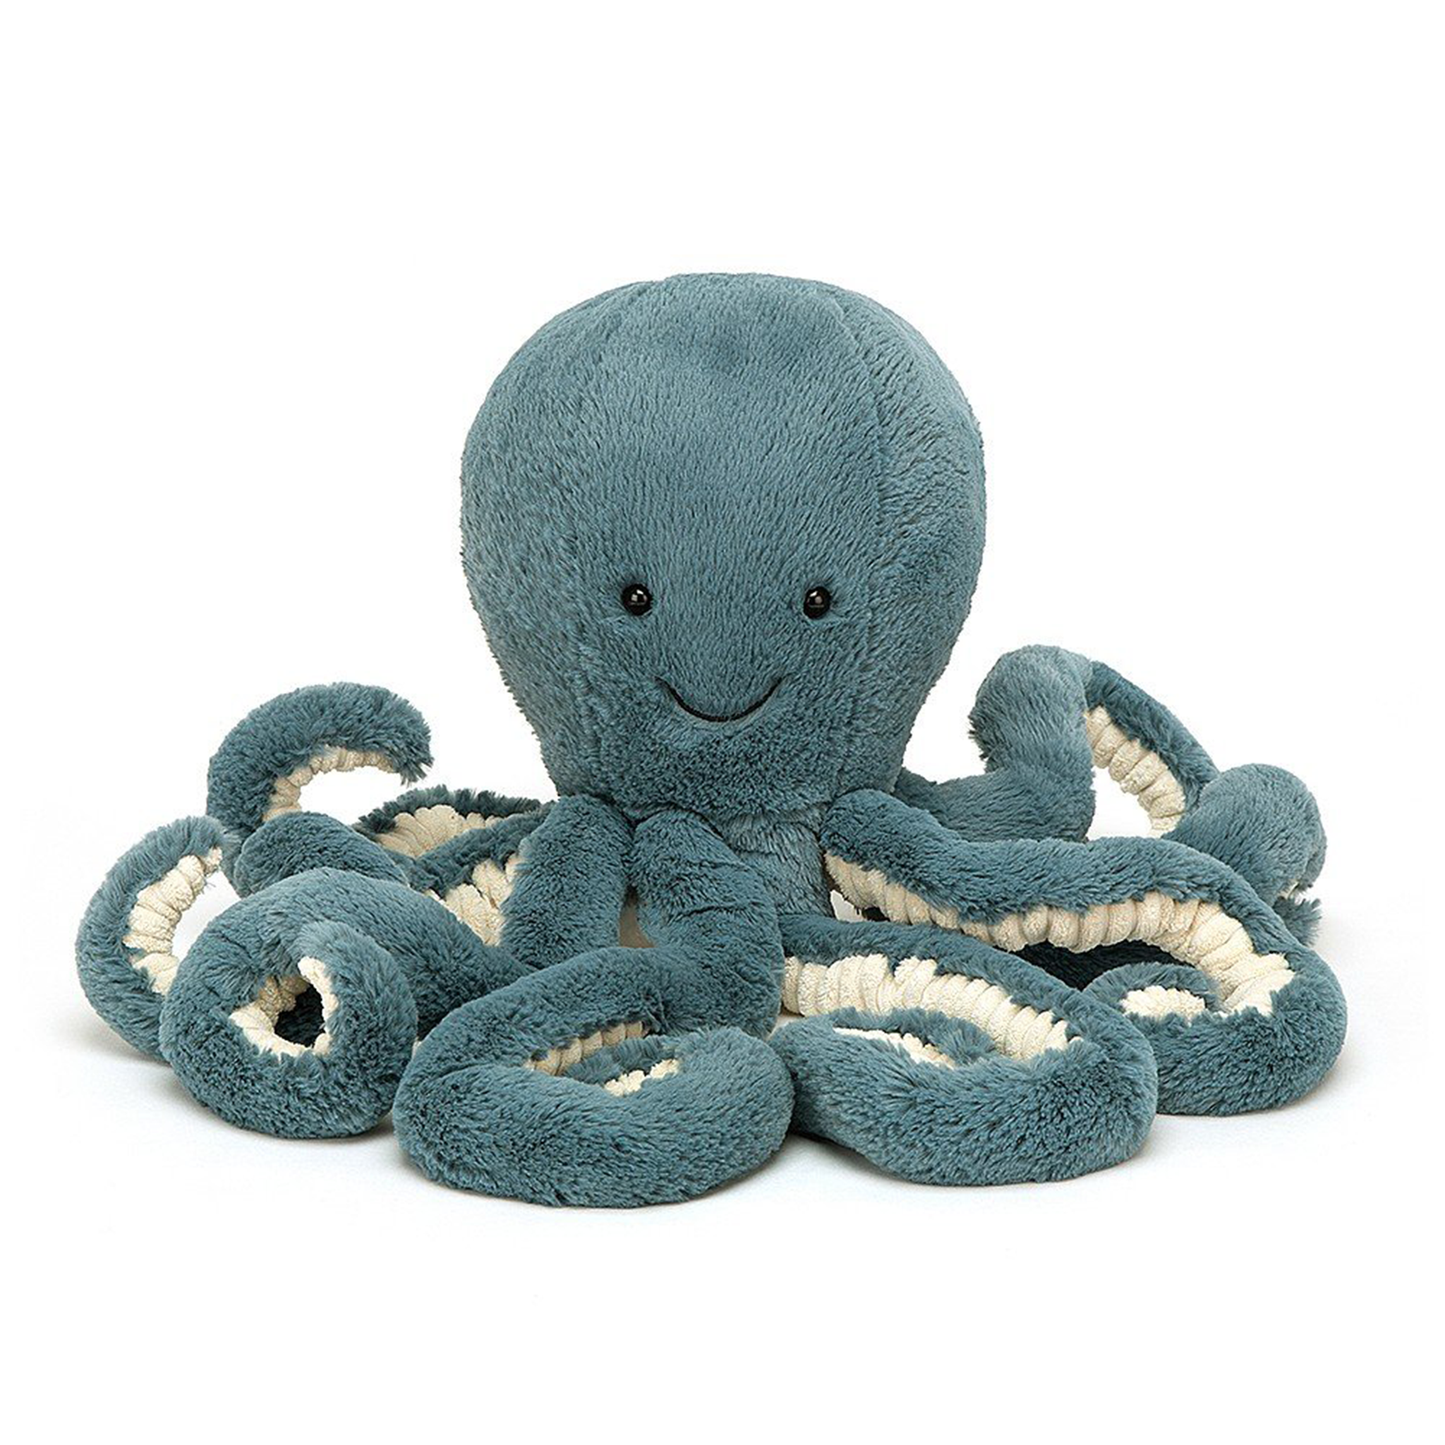 a large blue octopus stuffed animal with a smiley face